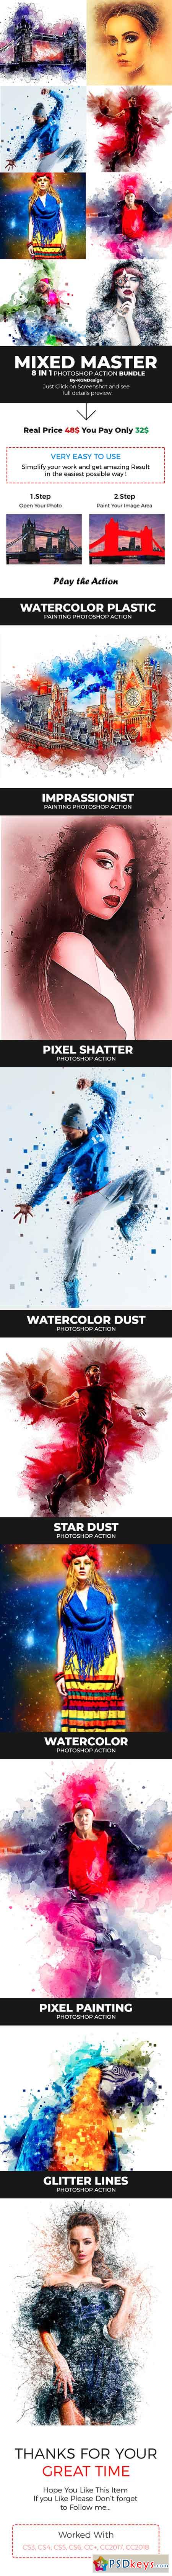 Mixed Master 8-in-1 Photoshop Action Bundle 22206109